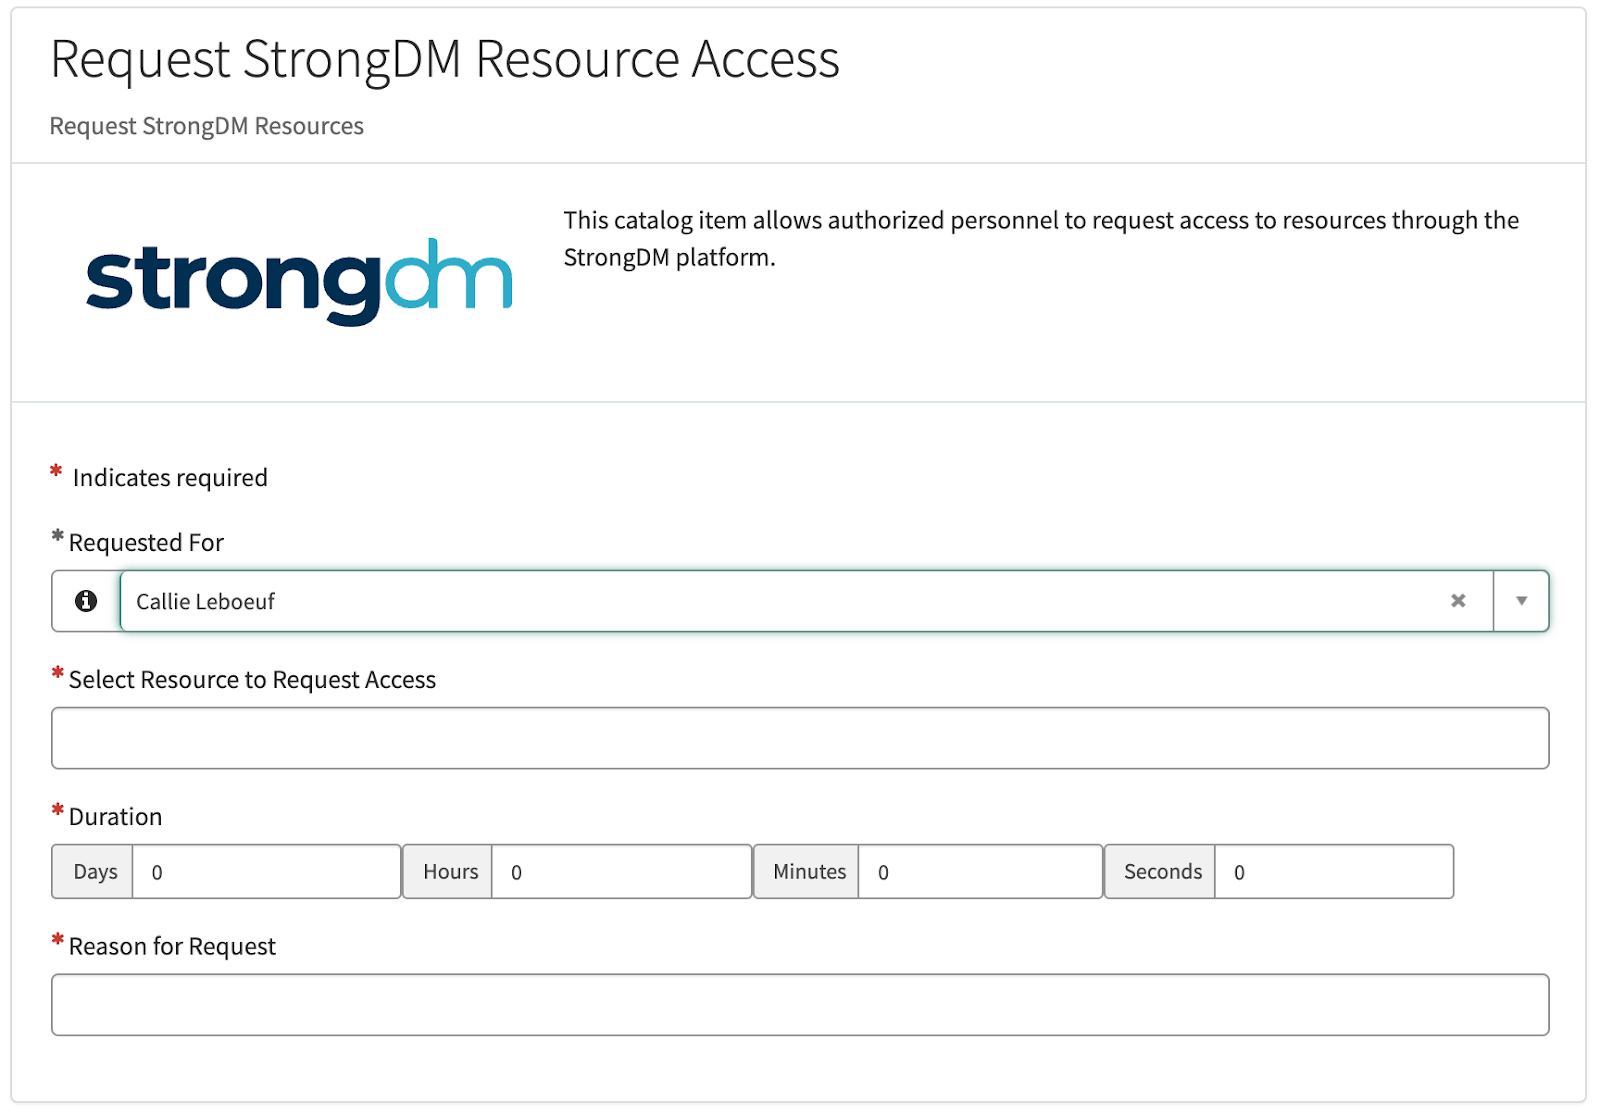 Example of the Request StrongDM Resource Access Form in ServiceNow